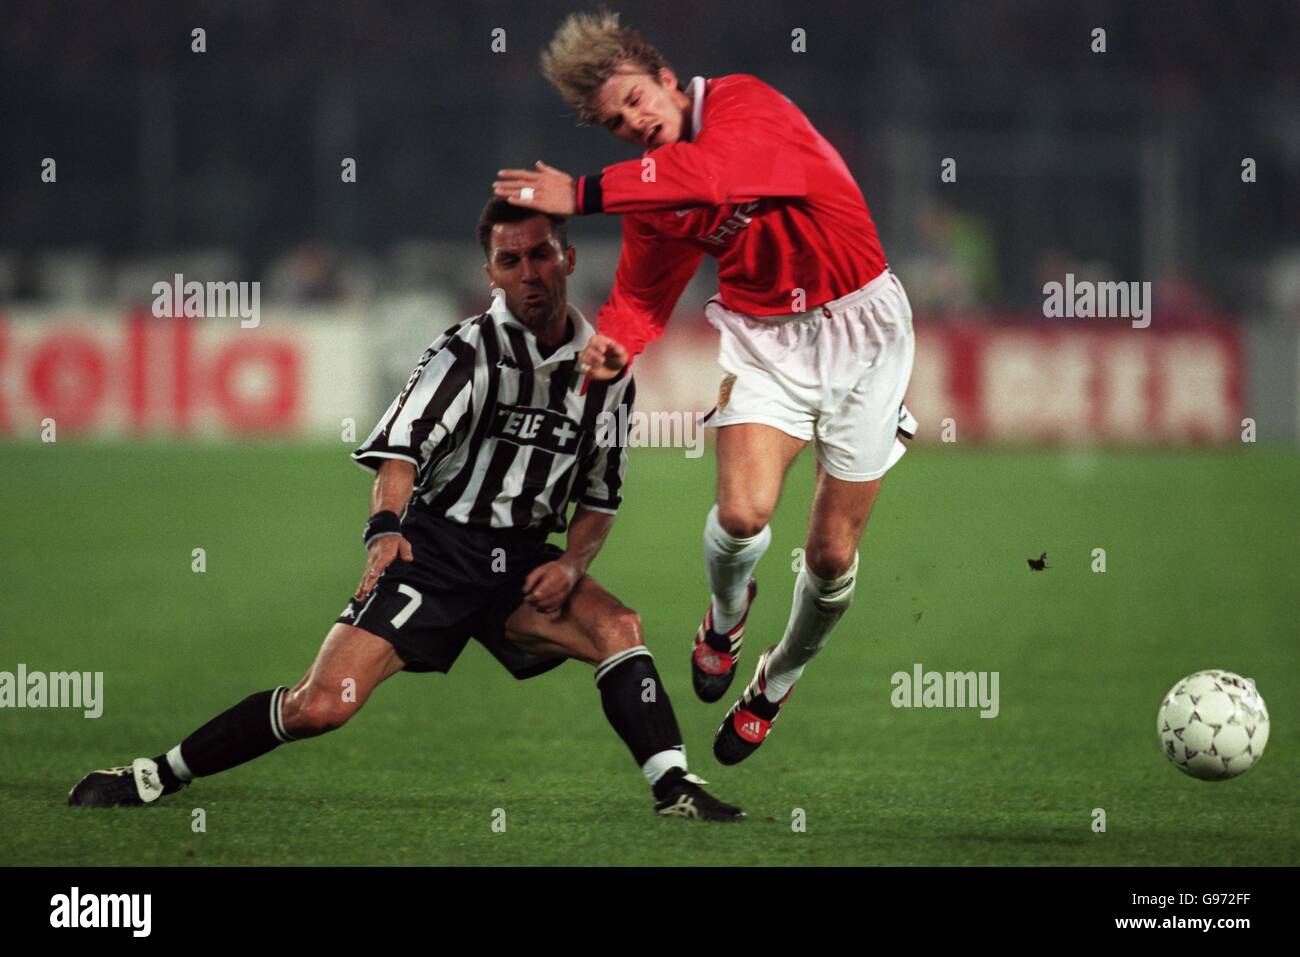 Soccer - UEFA Champions League - Semi Final 2nd Leg - Juventus v Manchester United. Manchester United's David Beckham is fouled by Juventus' Angelo Di Livio during the UEFA Champions League Match. Stock Photo